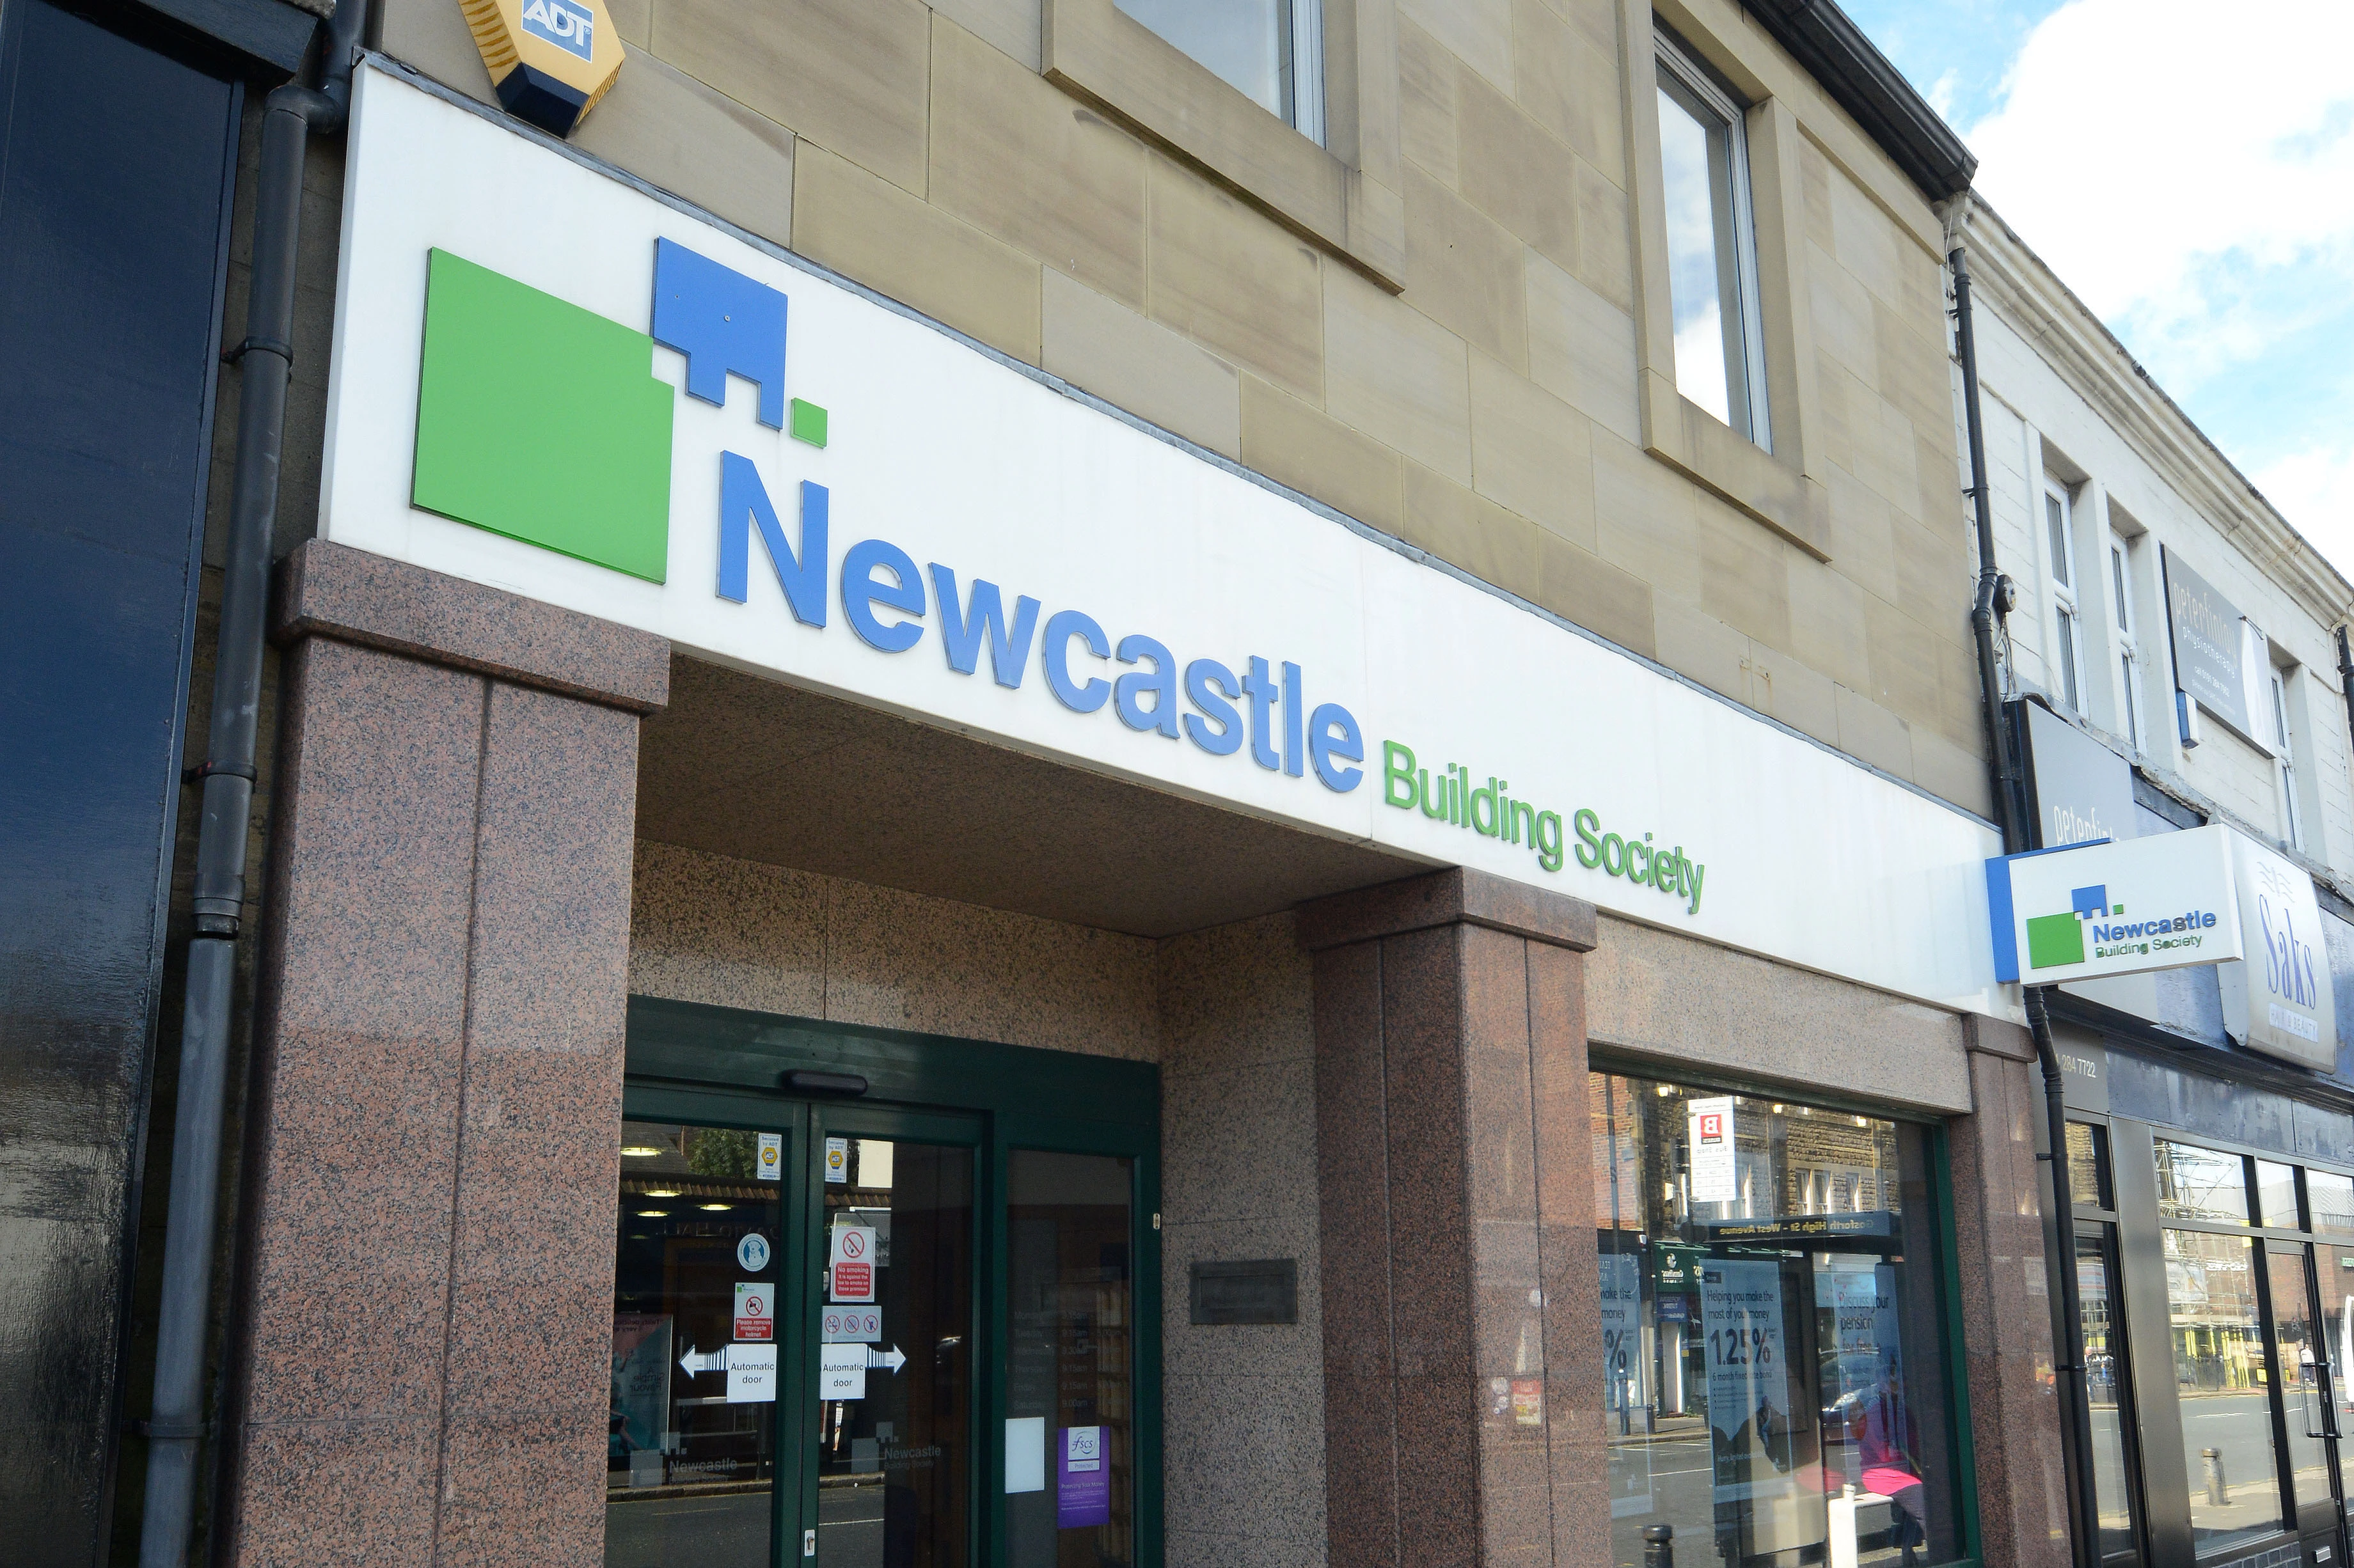 The Gosforth branch will reopen in December